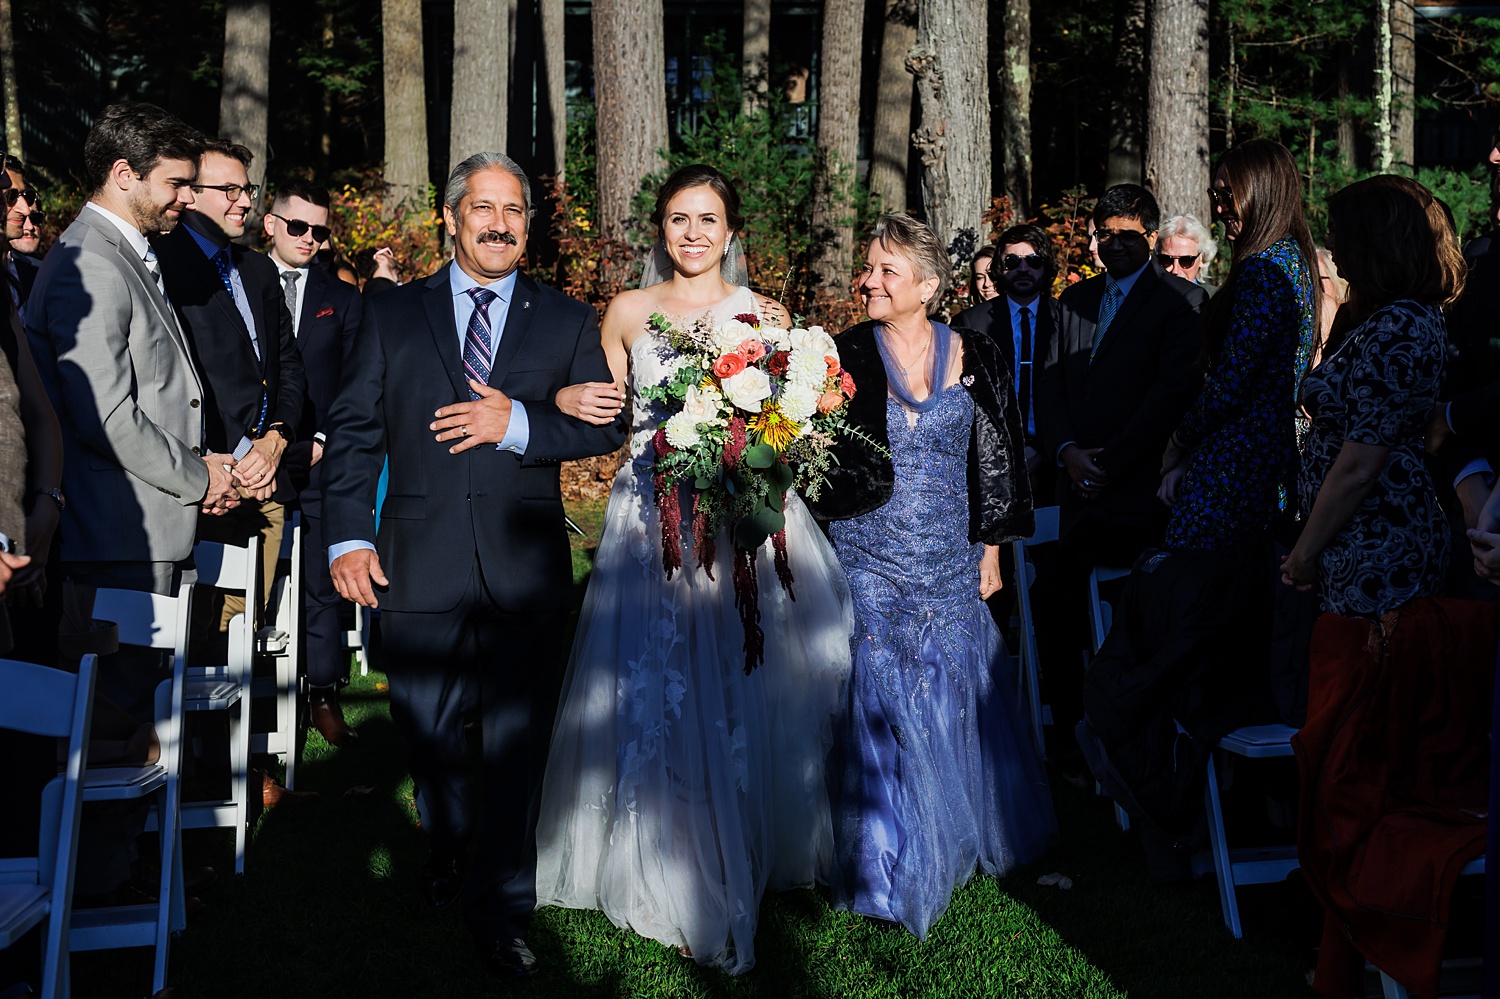 The bride and her parents come down the aisle on the sunny fall day